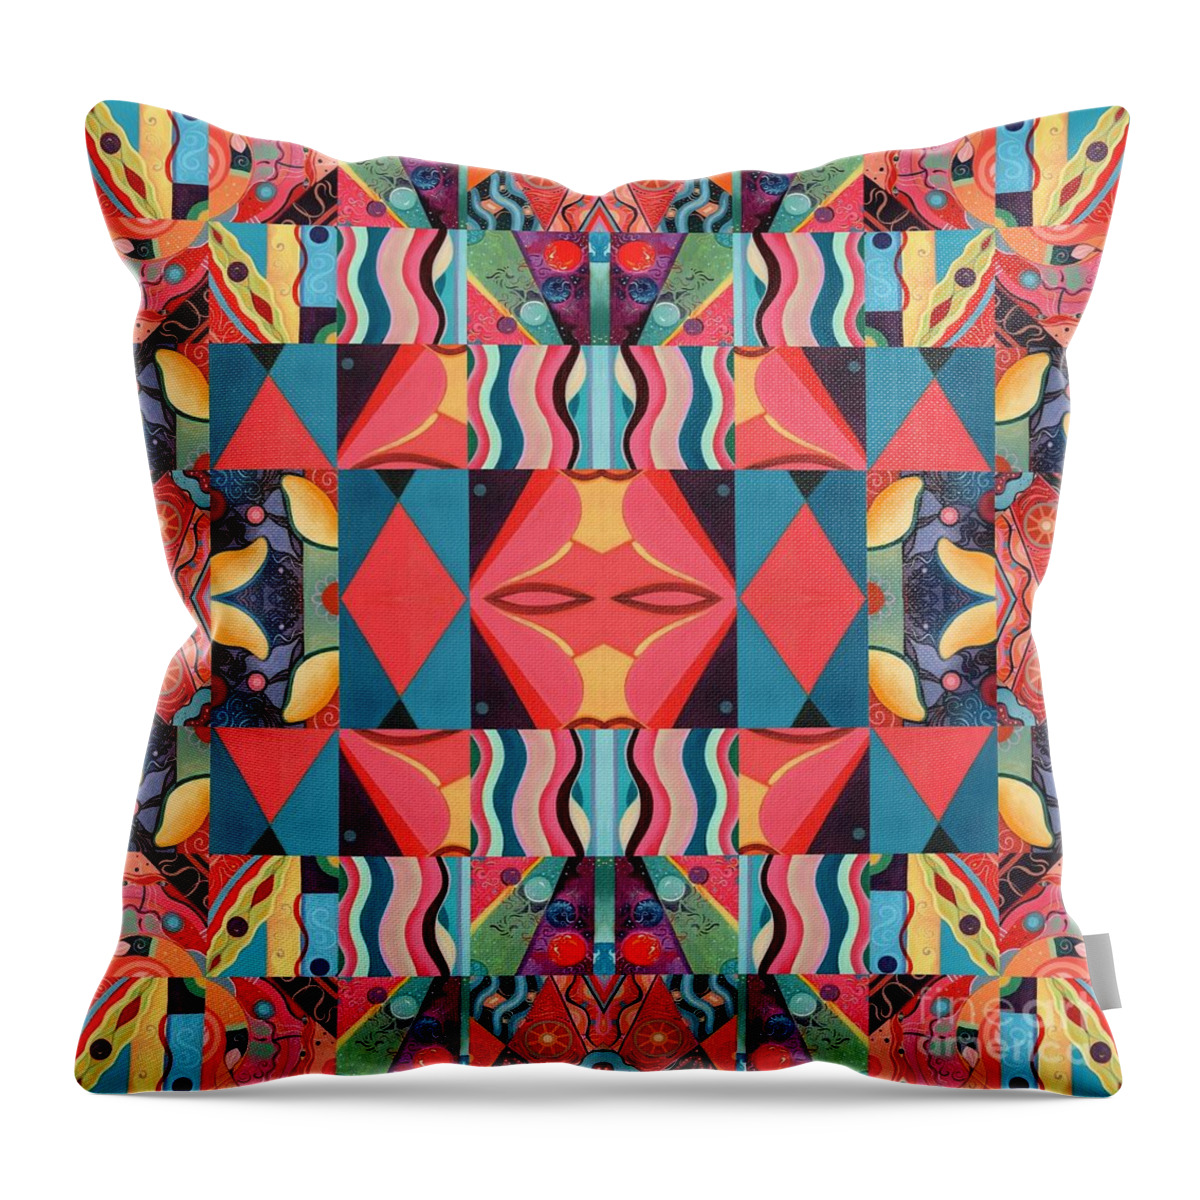 The Joy Of Design Mandala Series Puzzle 8 Arrangement 8 By Helena Tiainen Throw Pillow featuring the painting The Joy of Design Mandala Series Puzzle 8 Arrangement 9 by Helena Tiainen